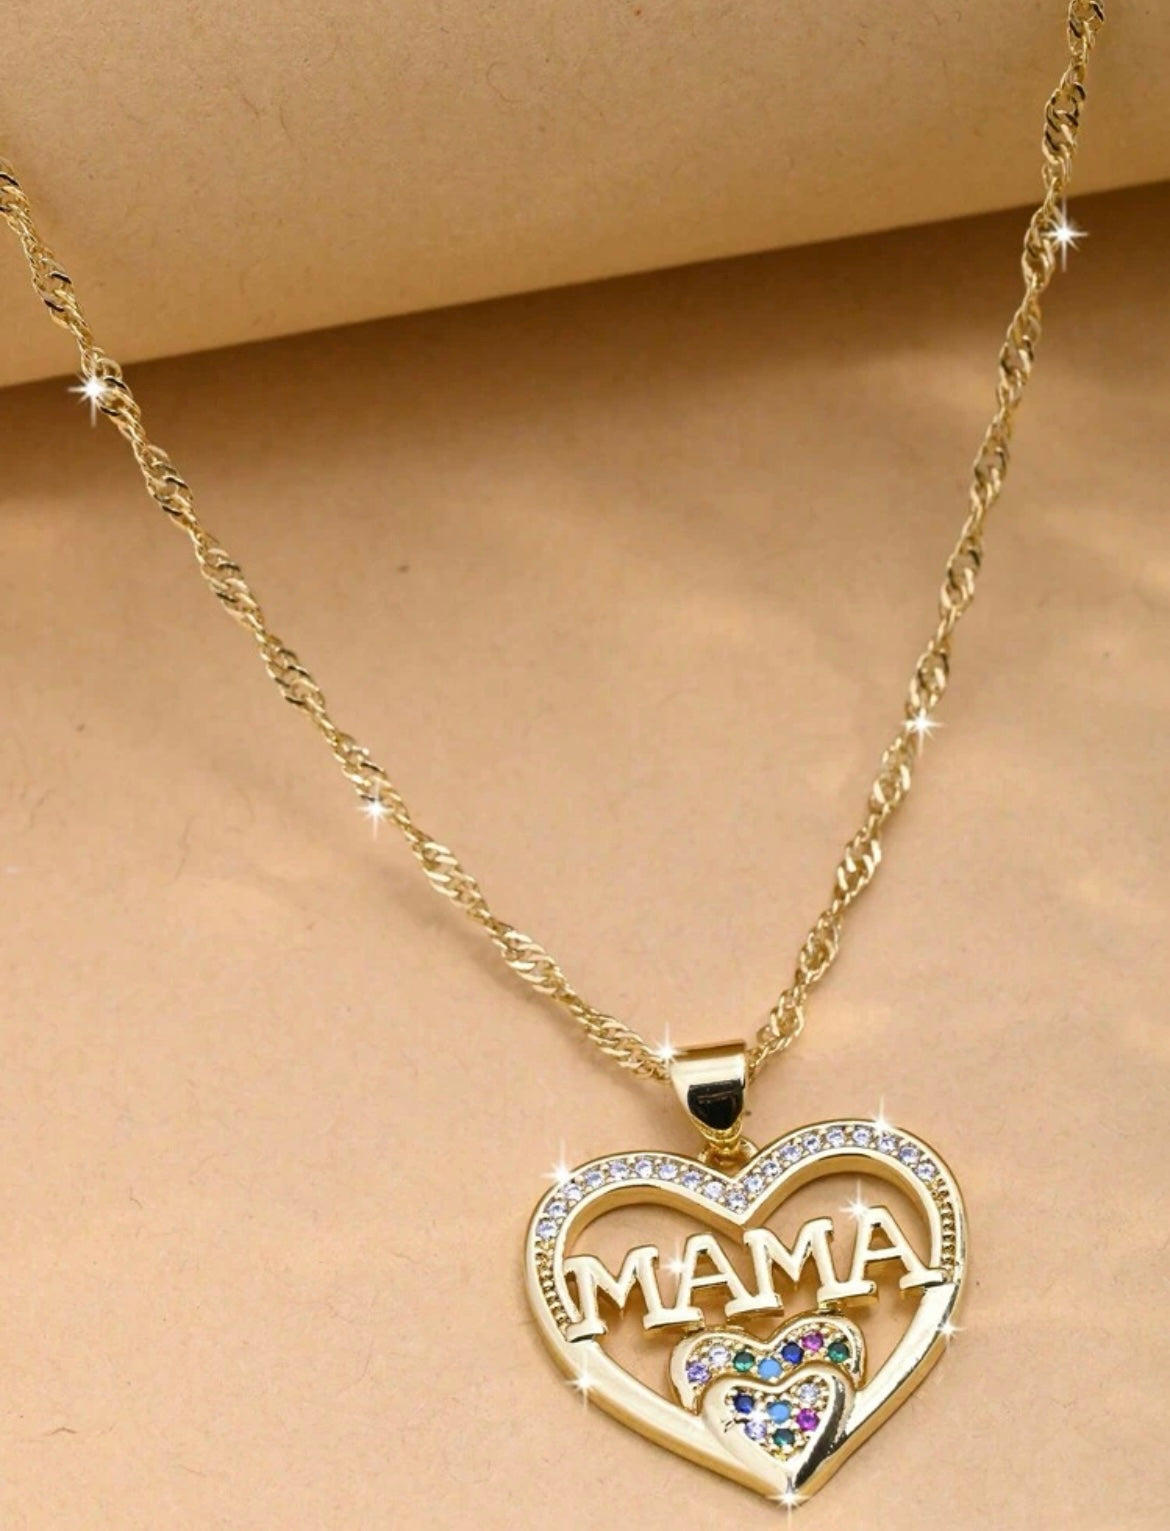 Mama over hearts necklace